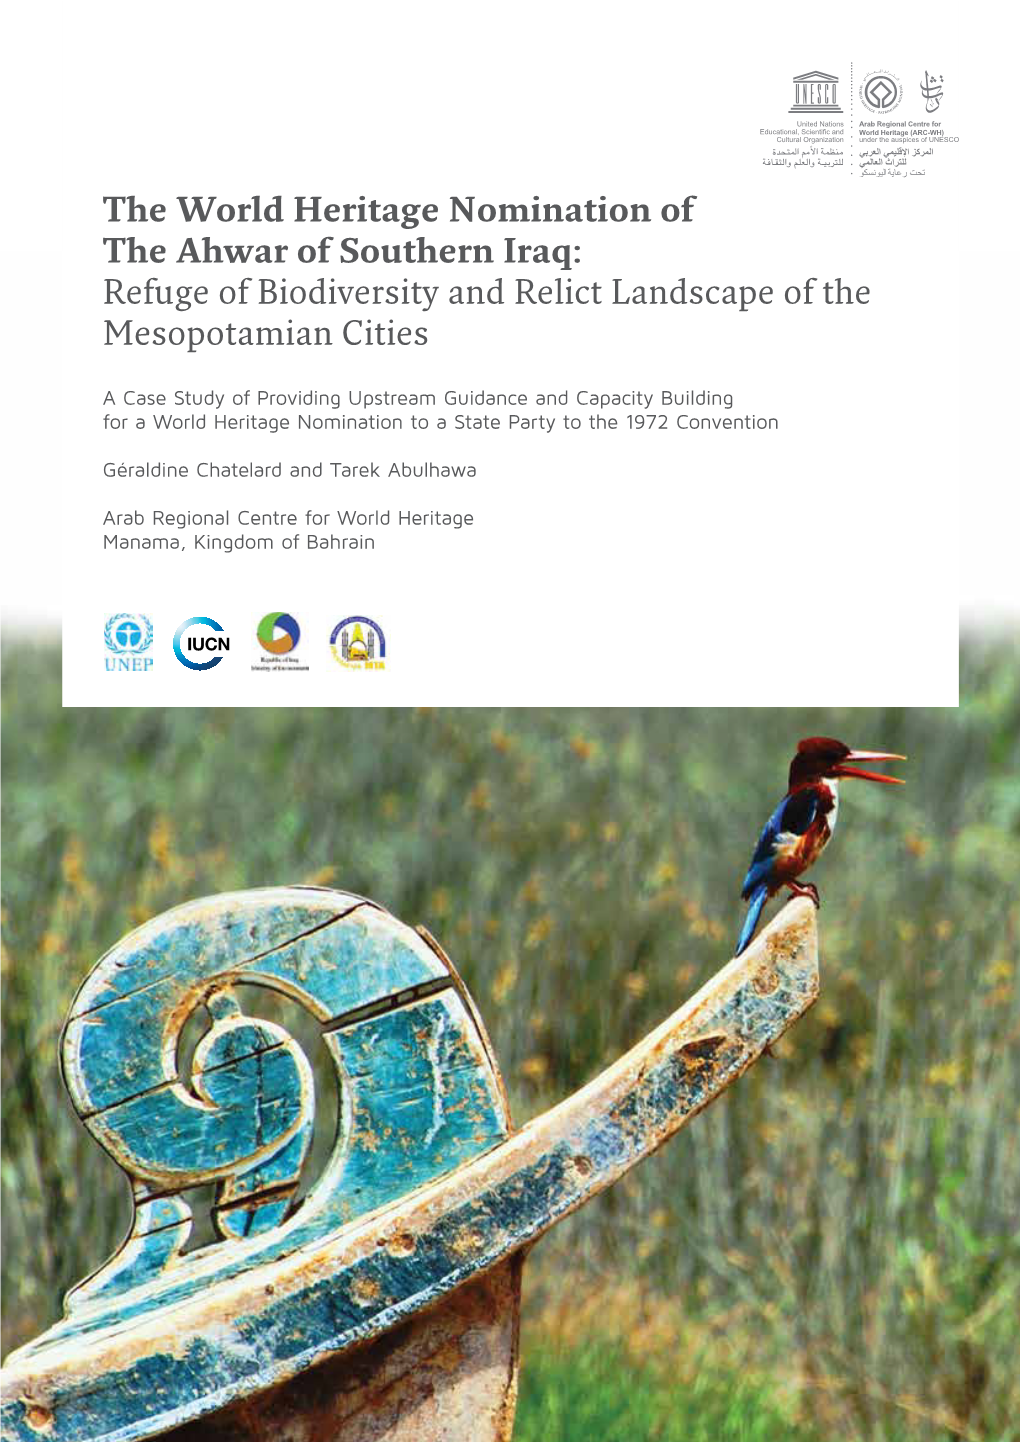 The World Heritage Nomination of the Ahwar of Southern Iraq: Refuge of Biodiversity and Relict Landscape of the Mesopotamian Cities